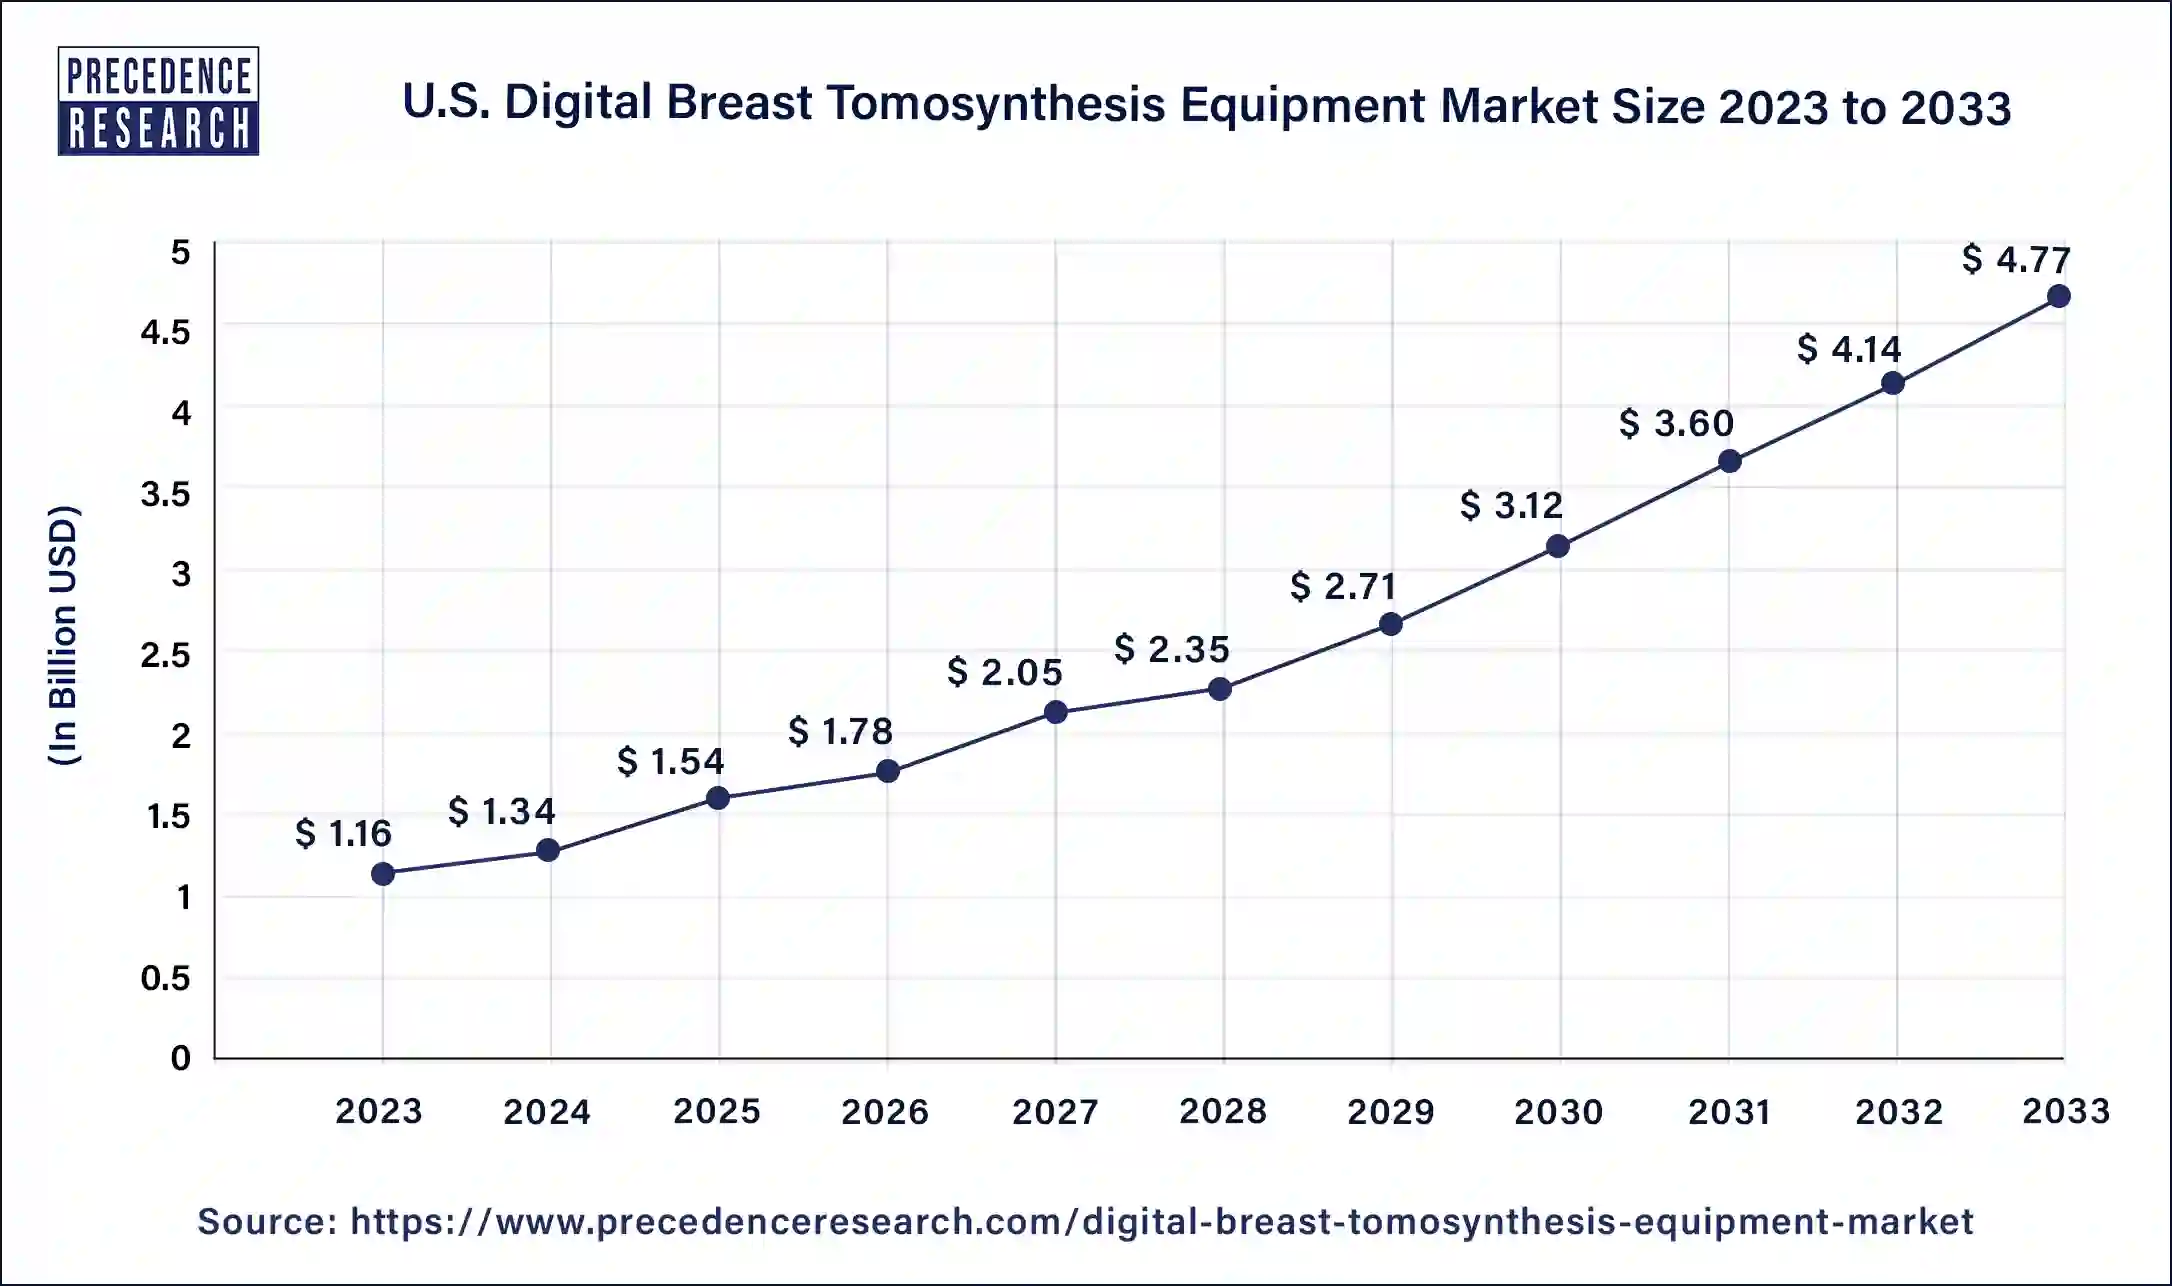 U.S. Digital Breast Tomosynthesis Equipment Market Size 2024 to 2033